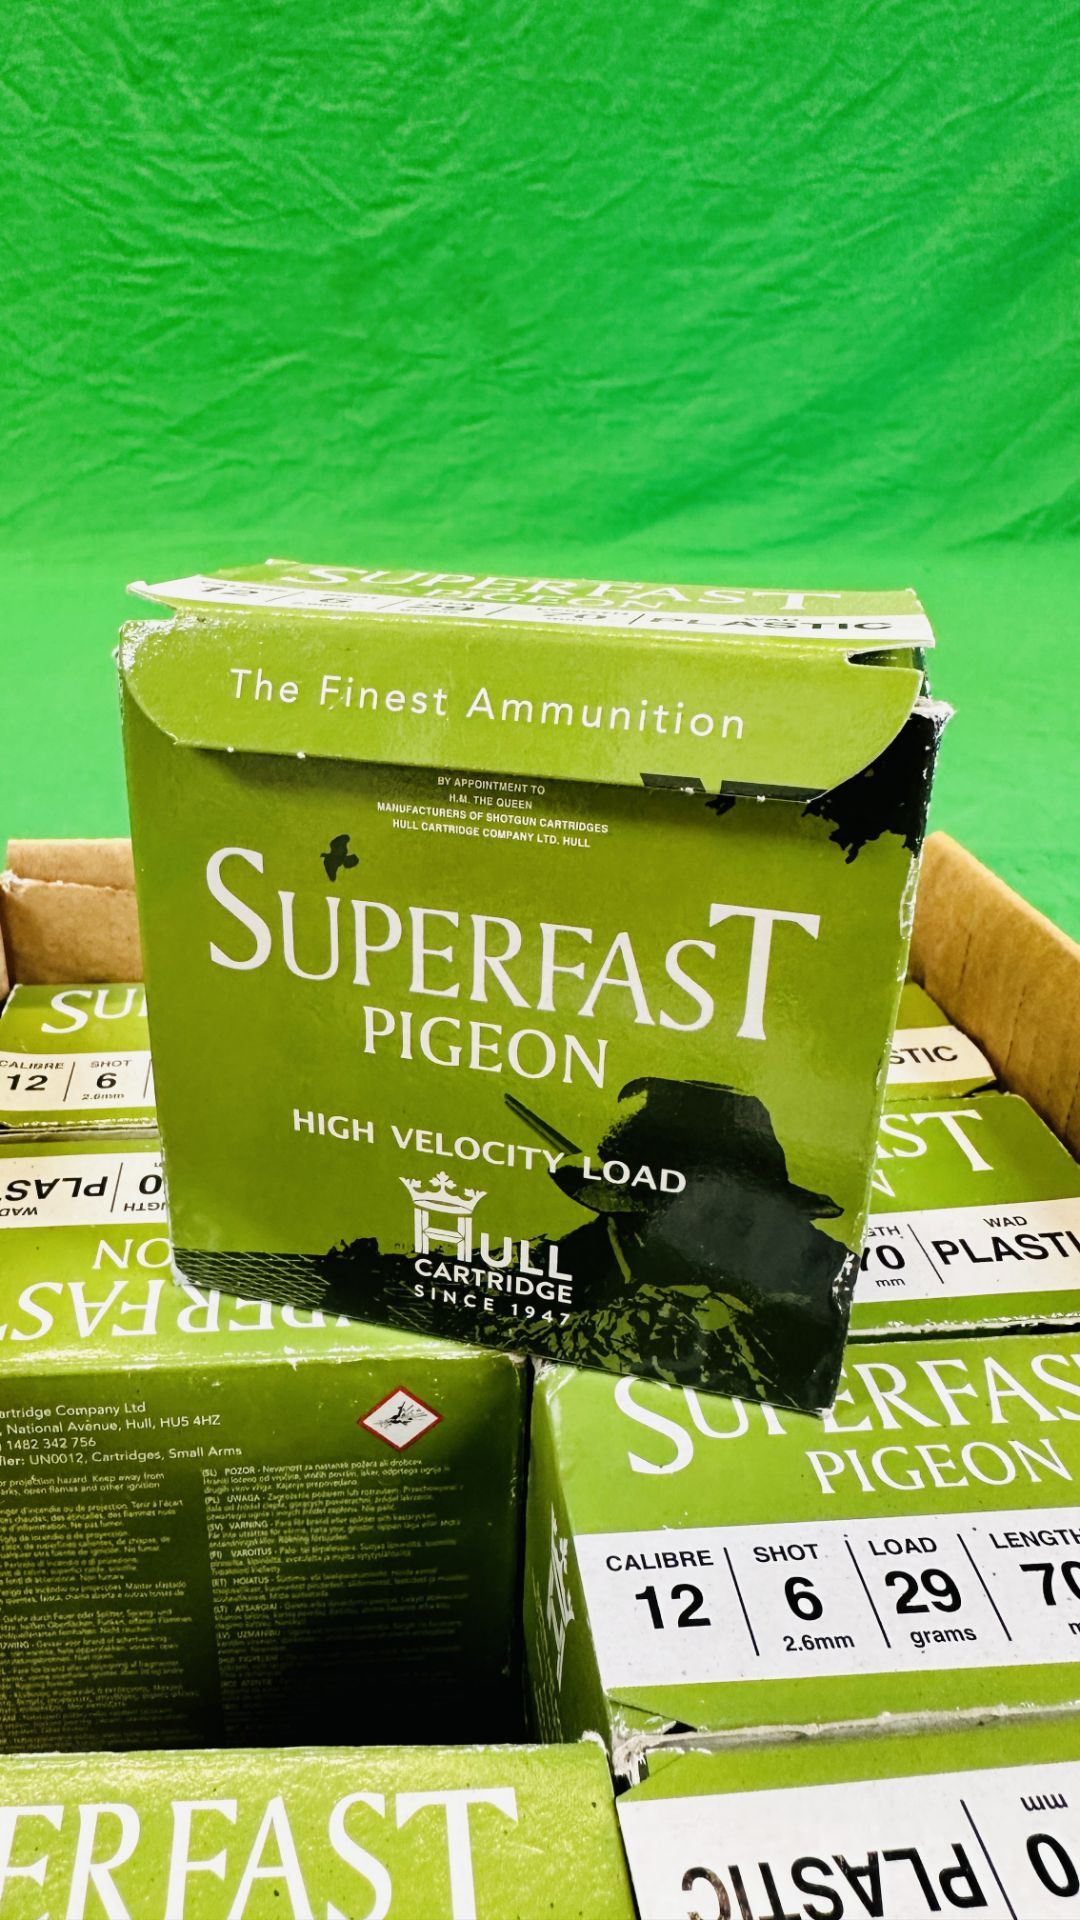 200 X HULL CARTRIDGE SUPERFAST PIGEON 12 GAUGE 29G 6 SHOT PLASTIC WAD CARTRIDGES - (TO BE COLLECTED - Image 3 of 3